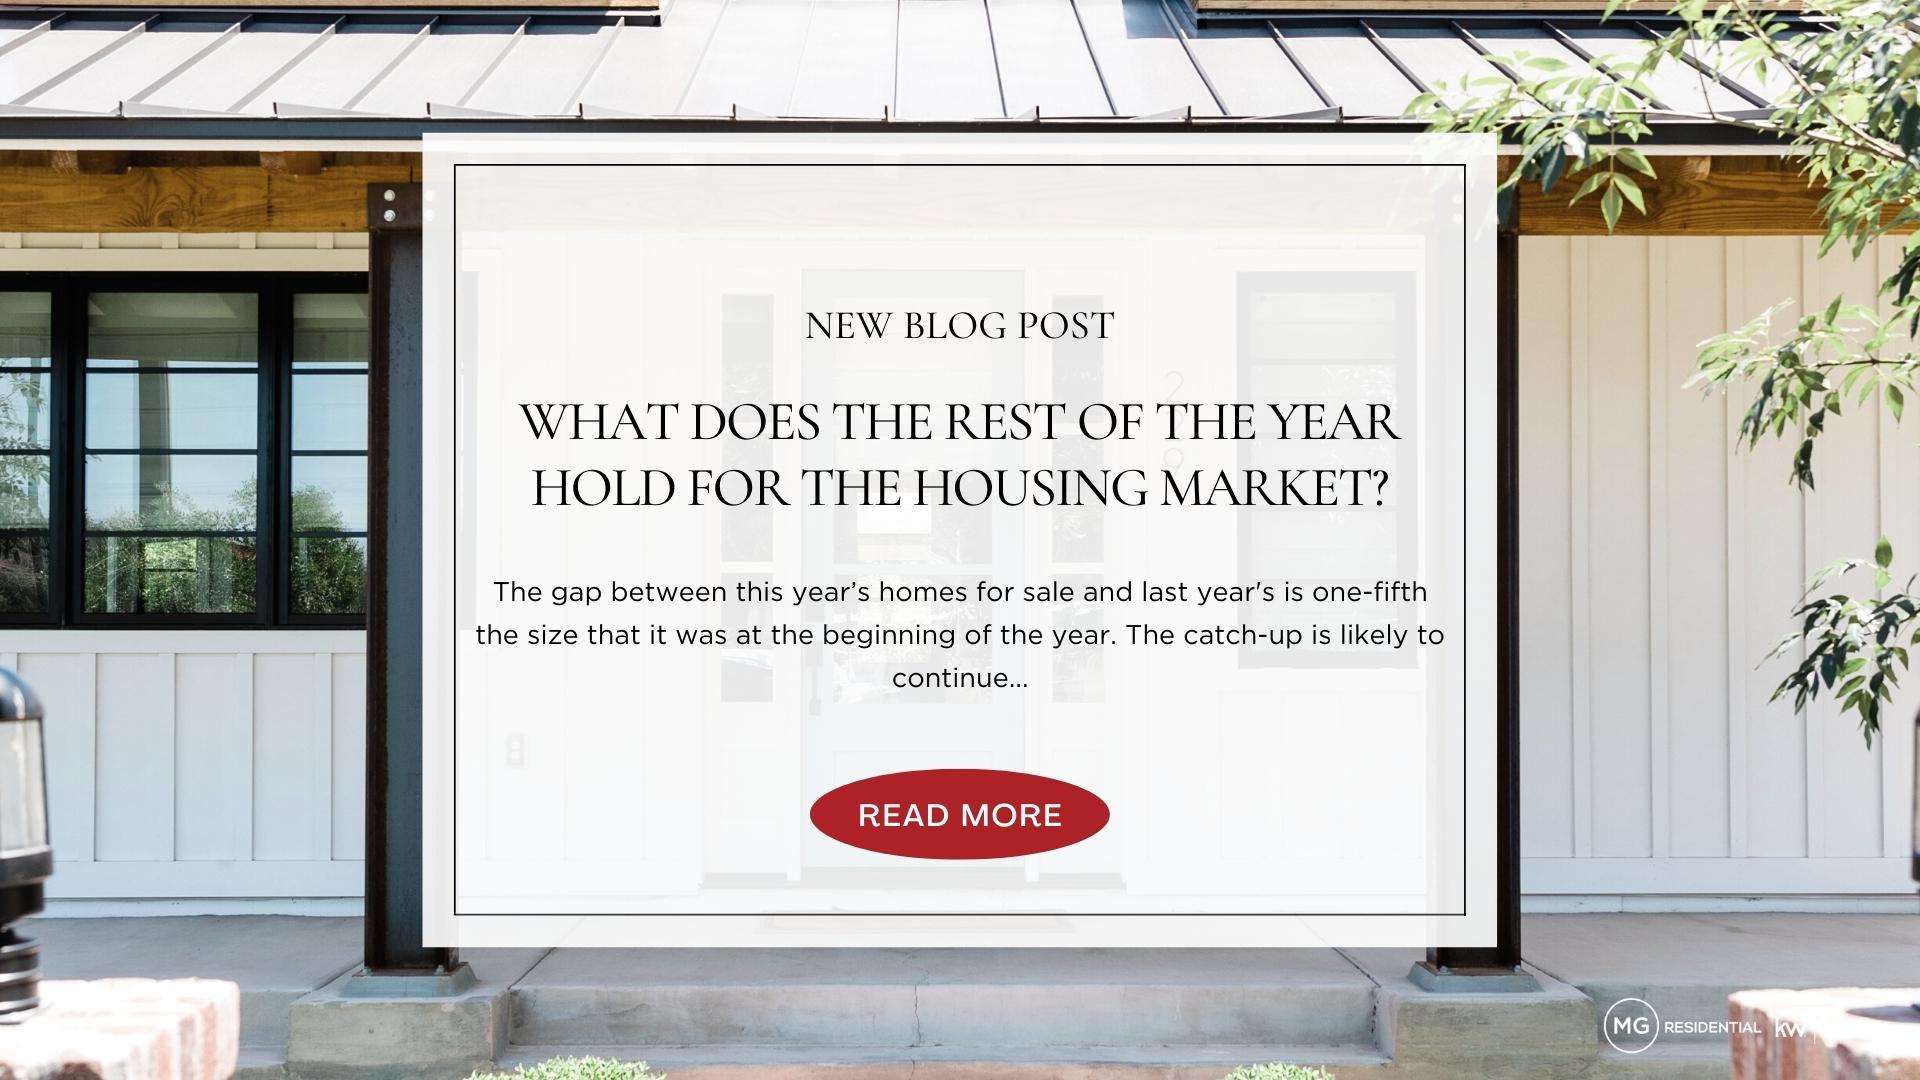 What Does the Rest of the Year Hold for the Housing Market?